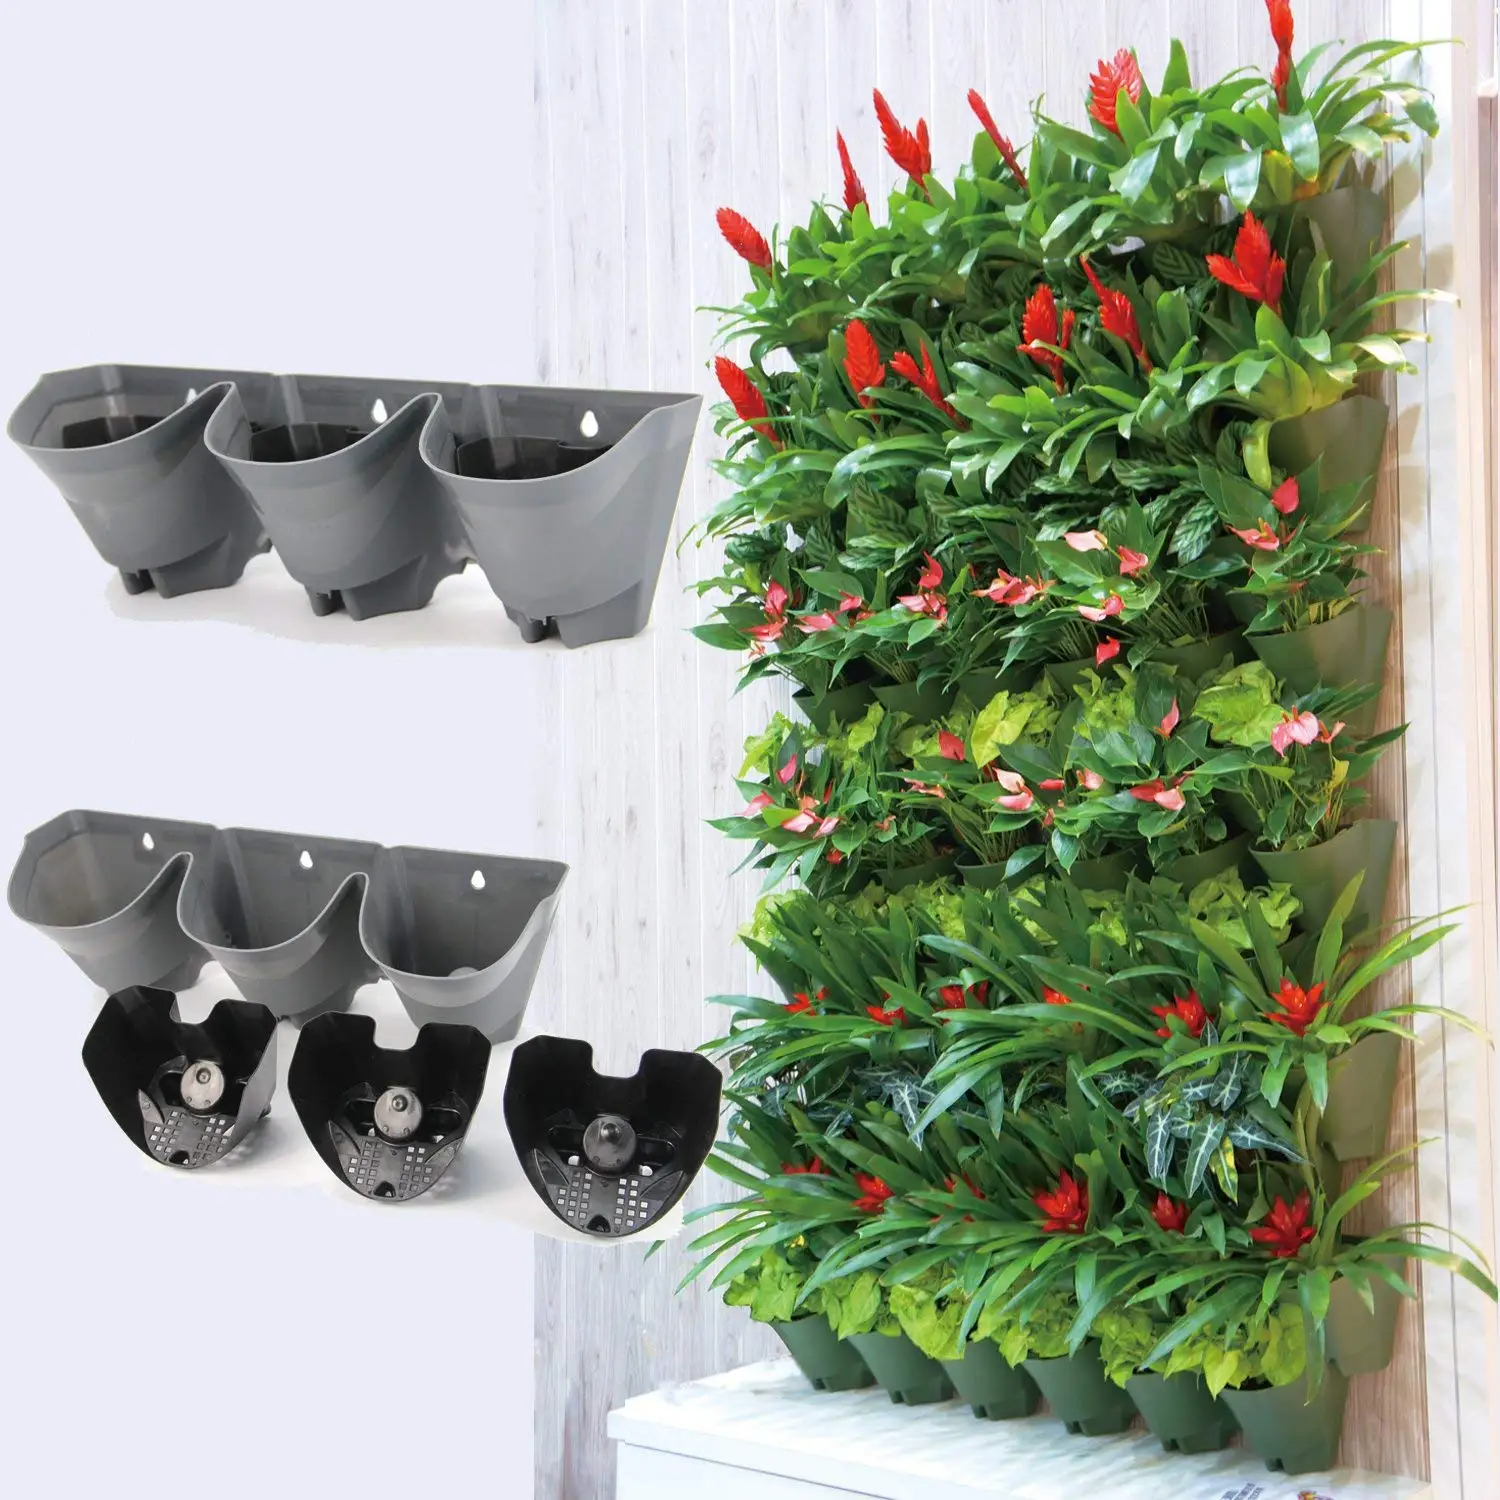 

Stackable Self Watering Outdoor Hanging Wall Planters Hanging Plastic Fence Flower Pots Set, White/black/grey/green/brick red